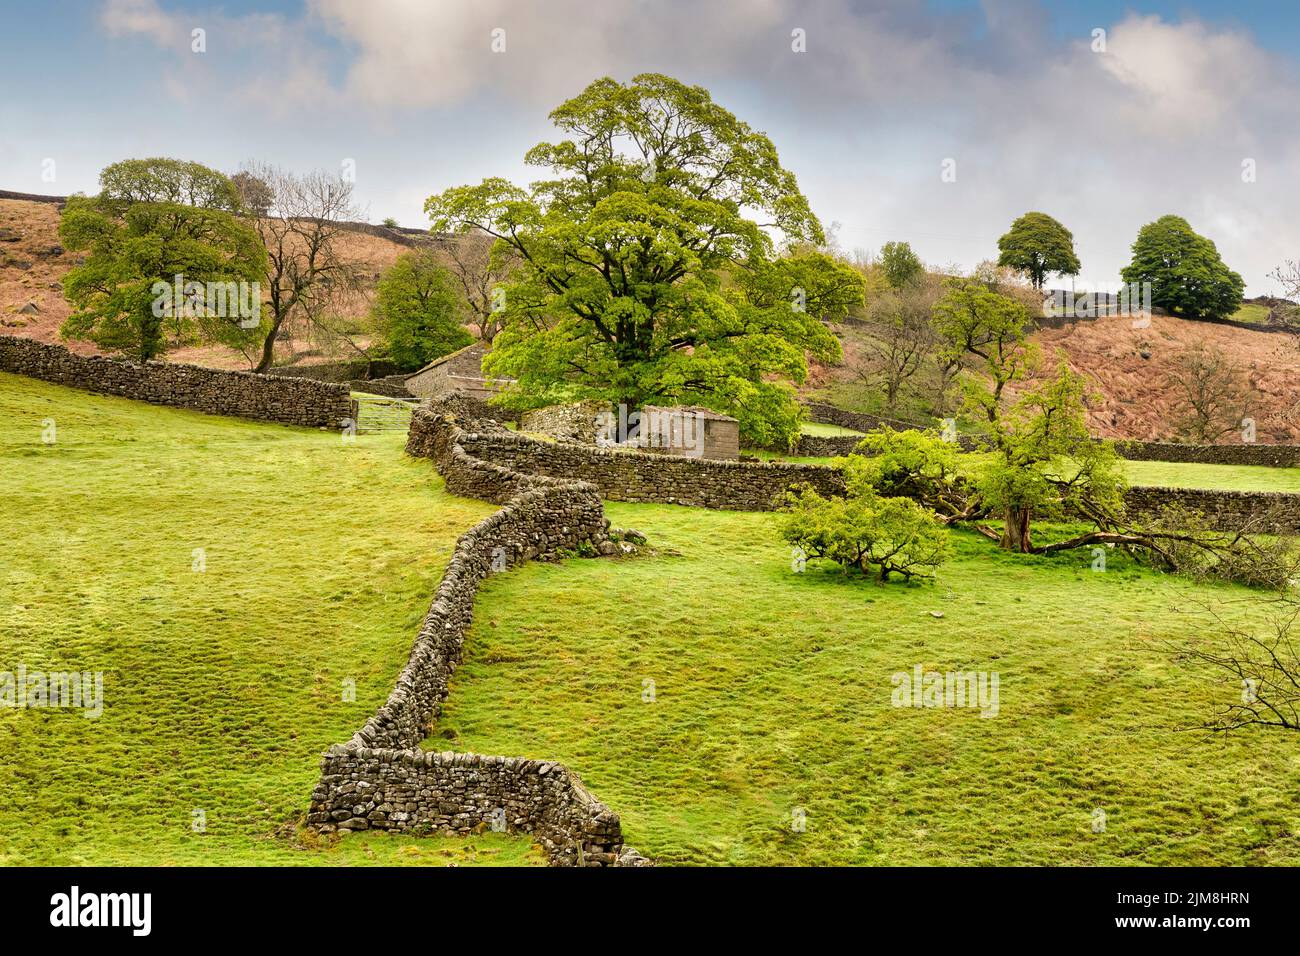 A typical dry stone wall landscape in the Yorkshire Dales, with beautiful spring green trees. Stock Photo